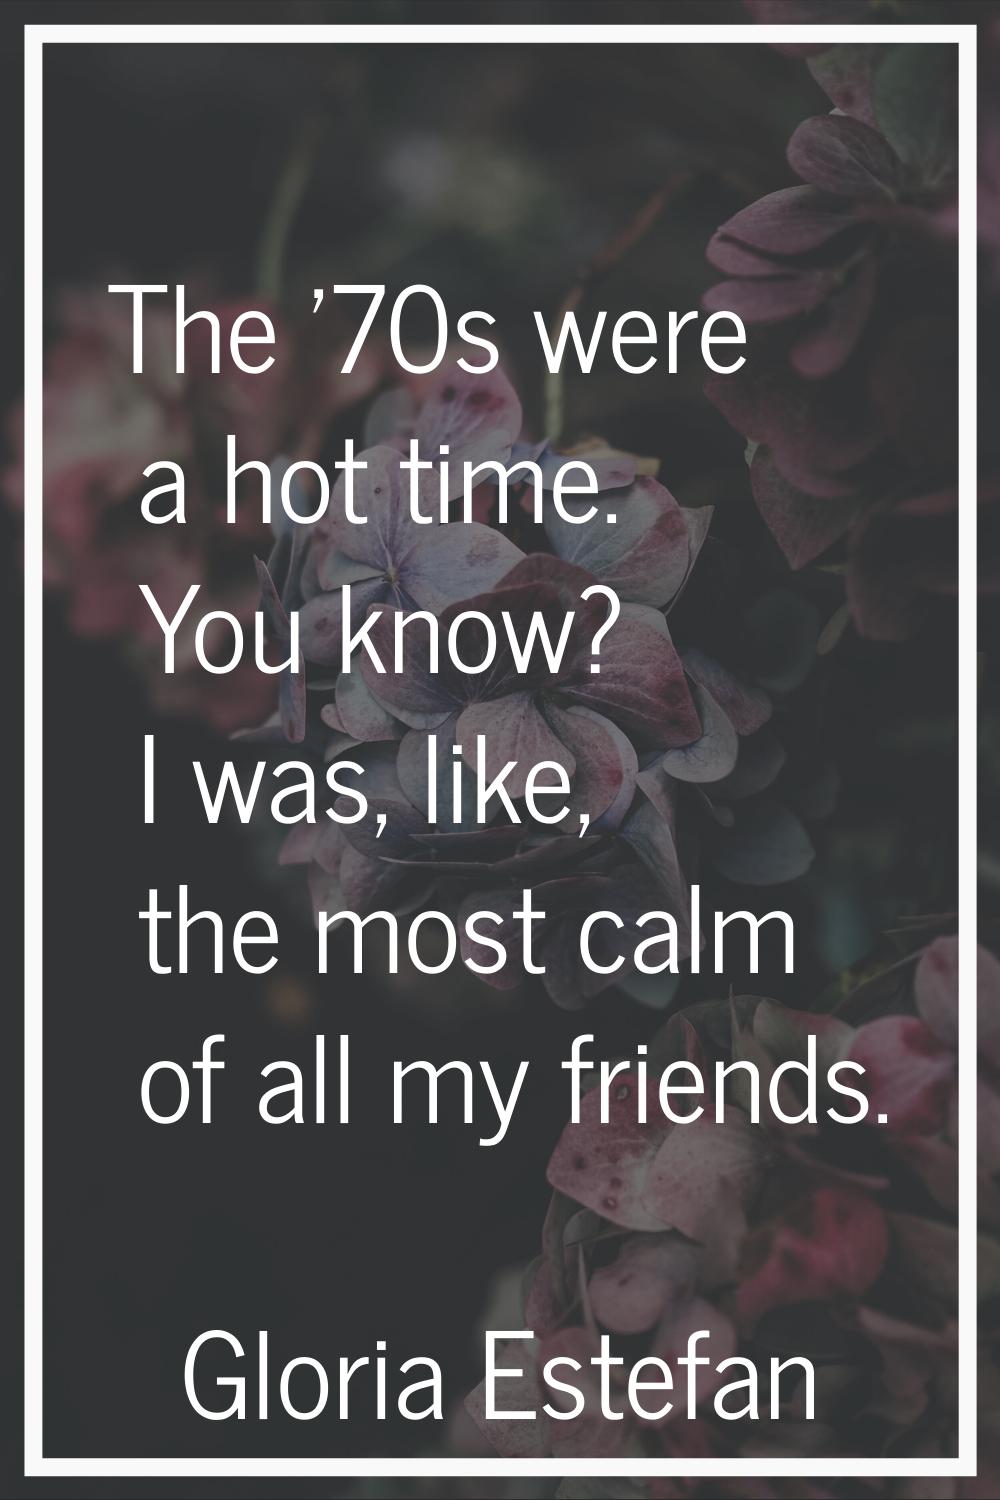 The '70s were a hot time. You know? I was, like, the most calm of all my friends.